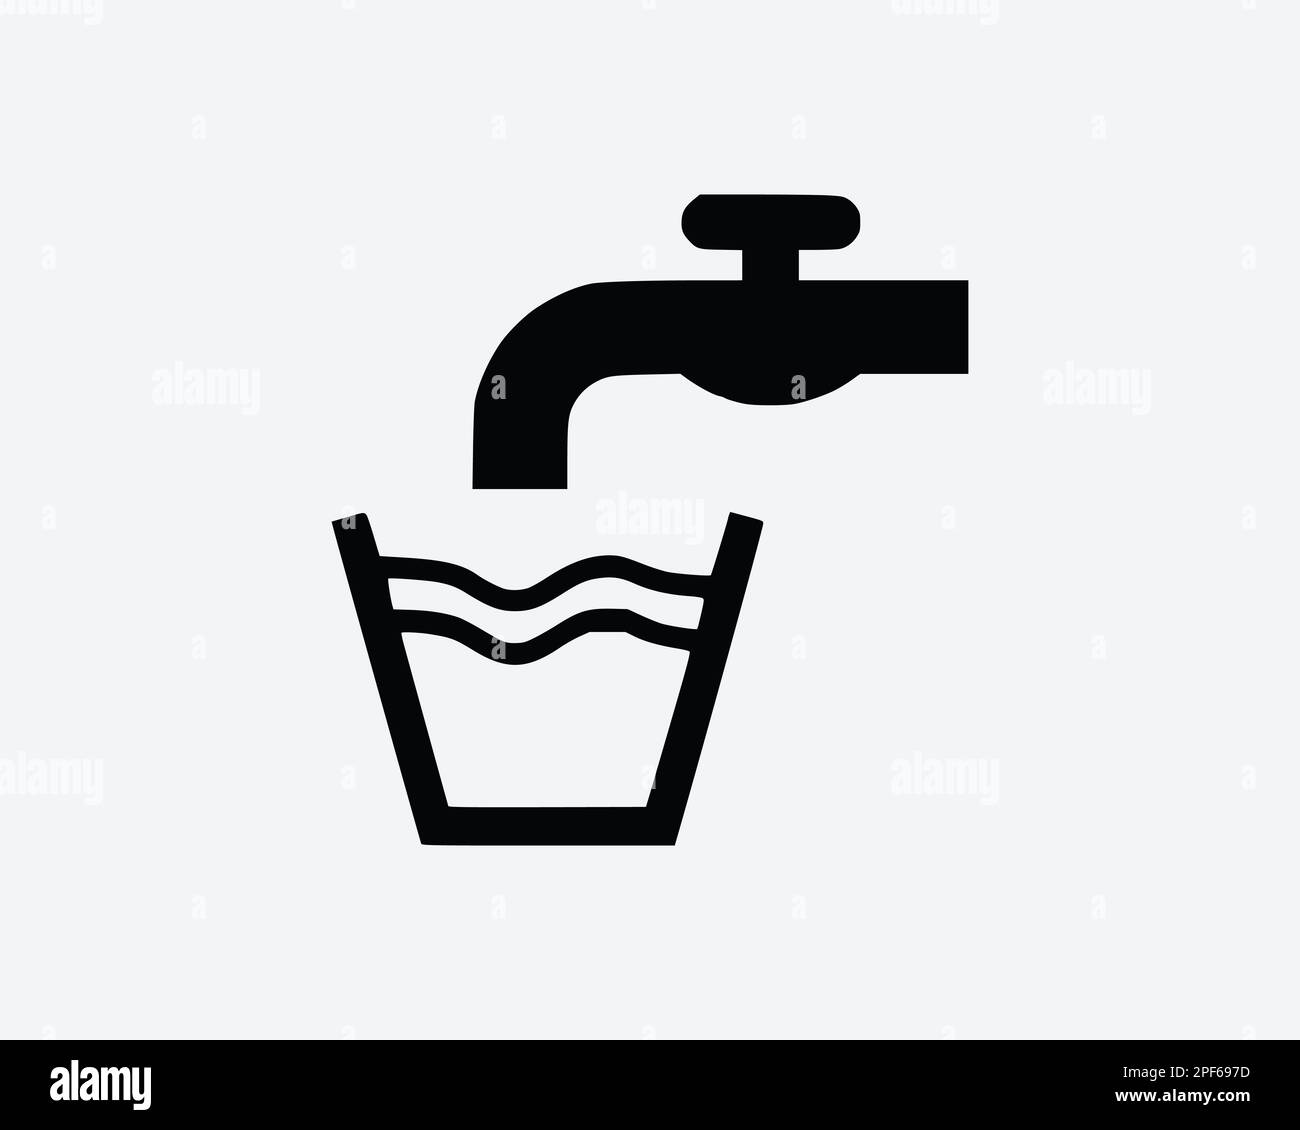 Drinking Tap Water Faucet Fill Cup Bucket Black White Silhouette Sign Symbol Icon Graphic Clipart Artwork Illustration Pictogram Vector Stock Vector